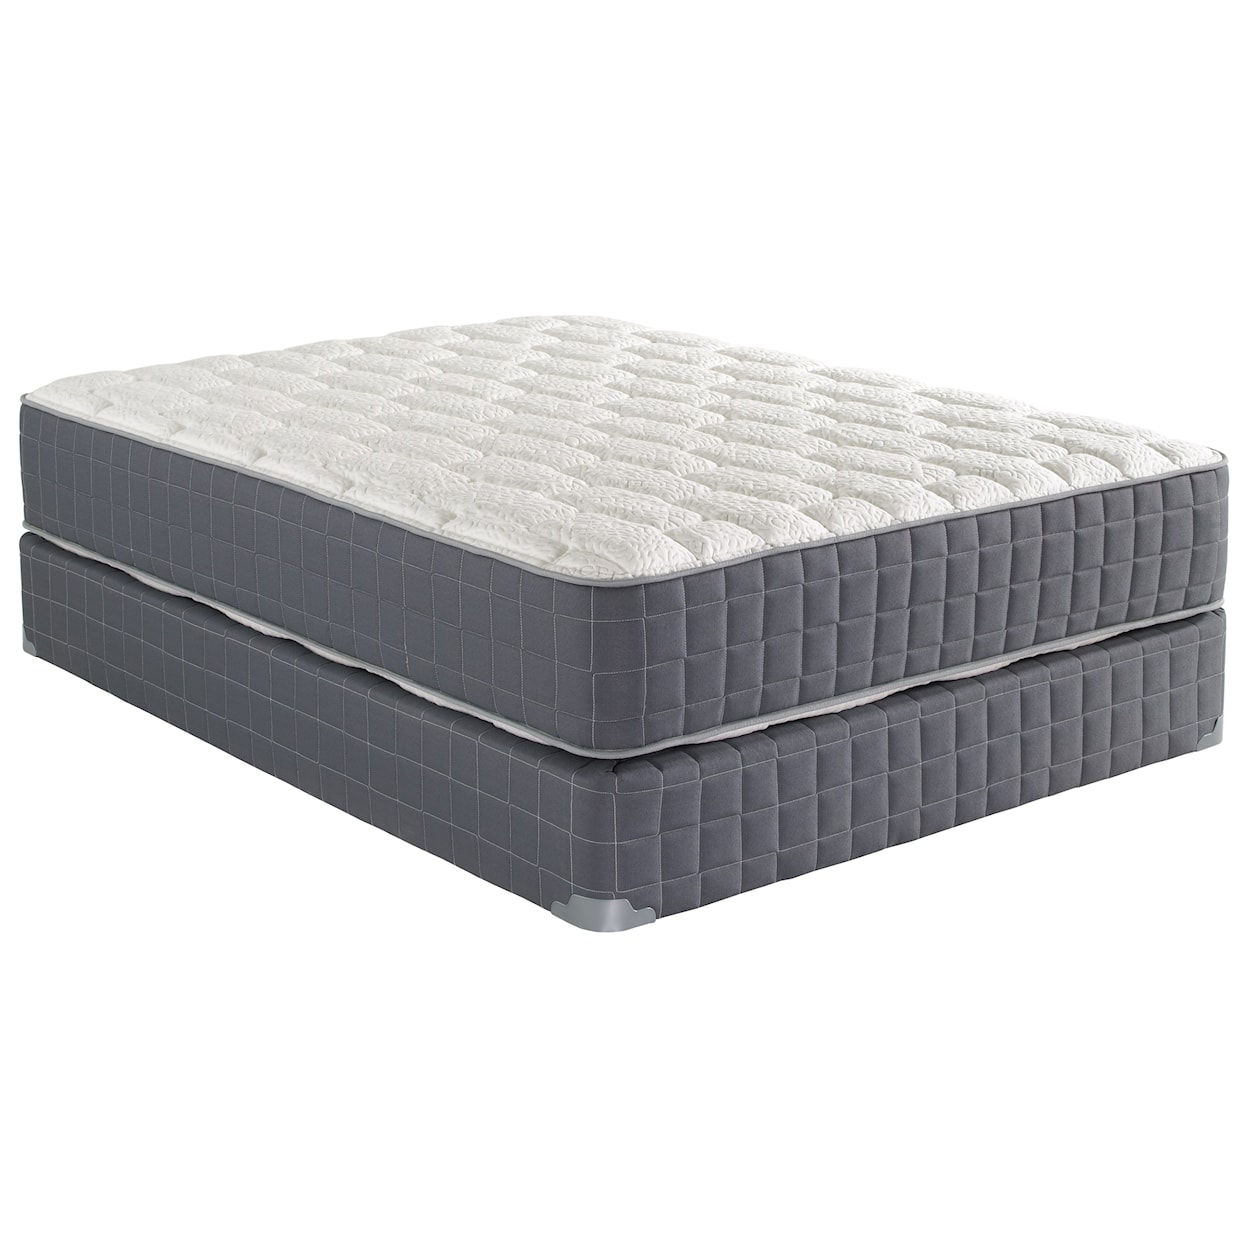 Spring Air Heritage I Queen 12" Two Sided Mattress Set